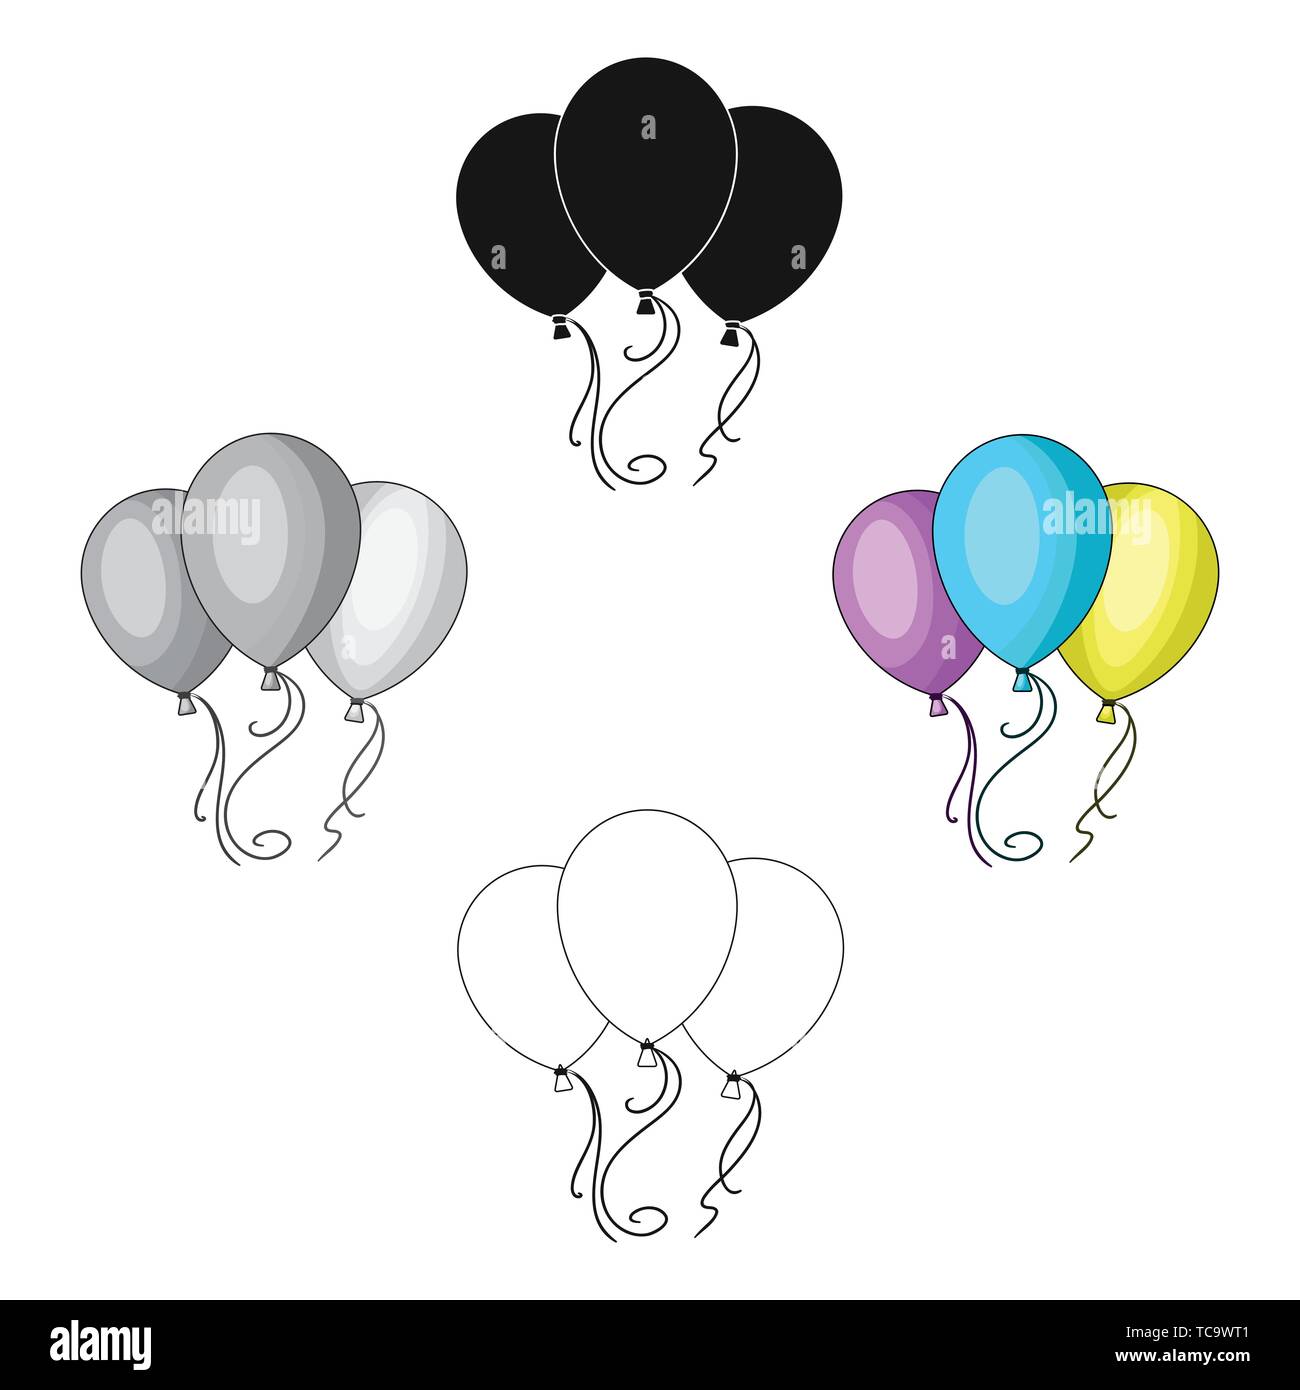 https://c8.alamy.com/comp/TC9WT1/blue-pink-and-yellow-balloons-for-children-children-s-toys-in-the-amusement-parkamusement-park-single-icon-in-cartoonblack-style-vector-symbol-stoc-TC9WT1.jpg